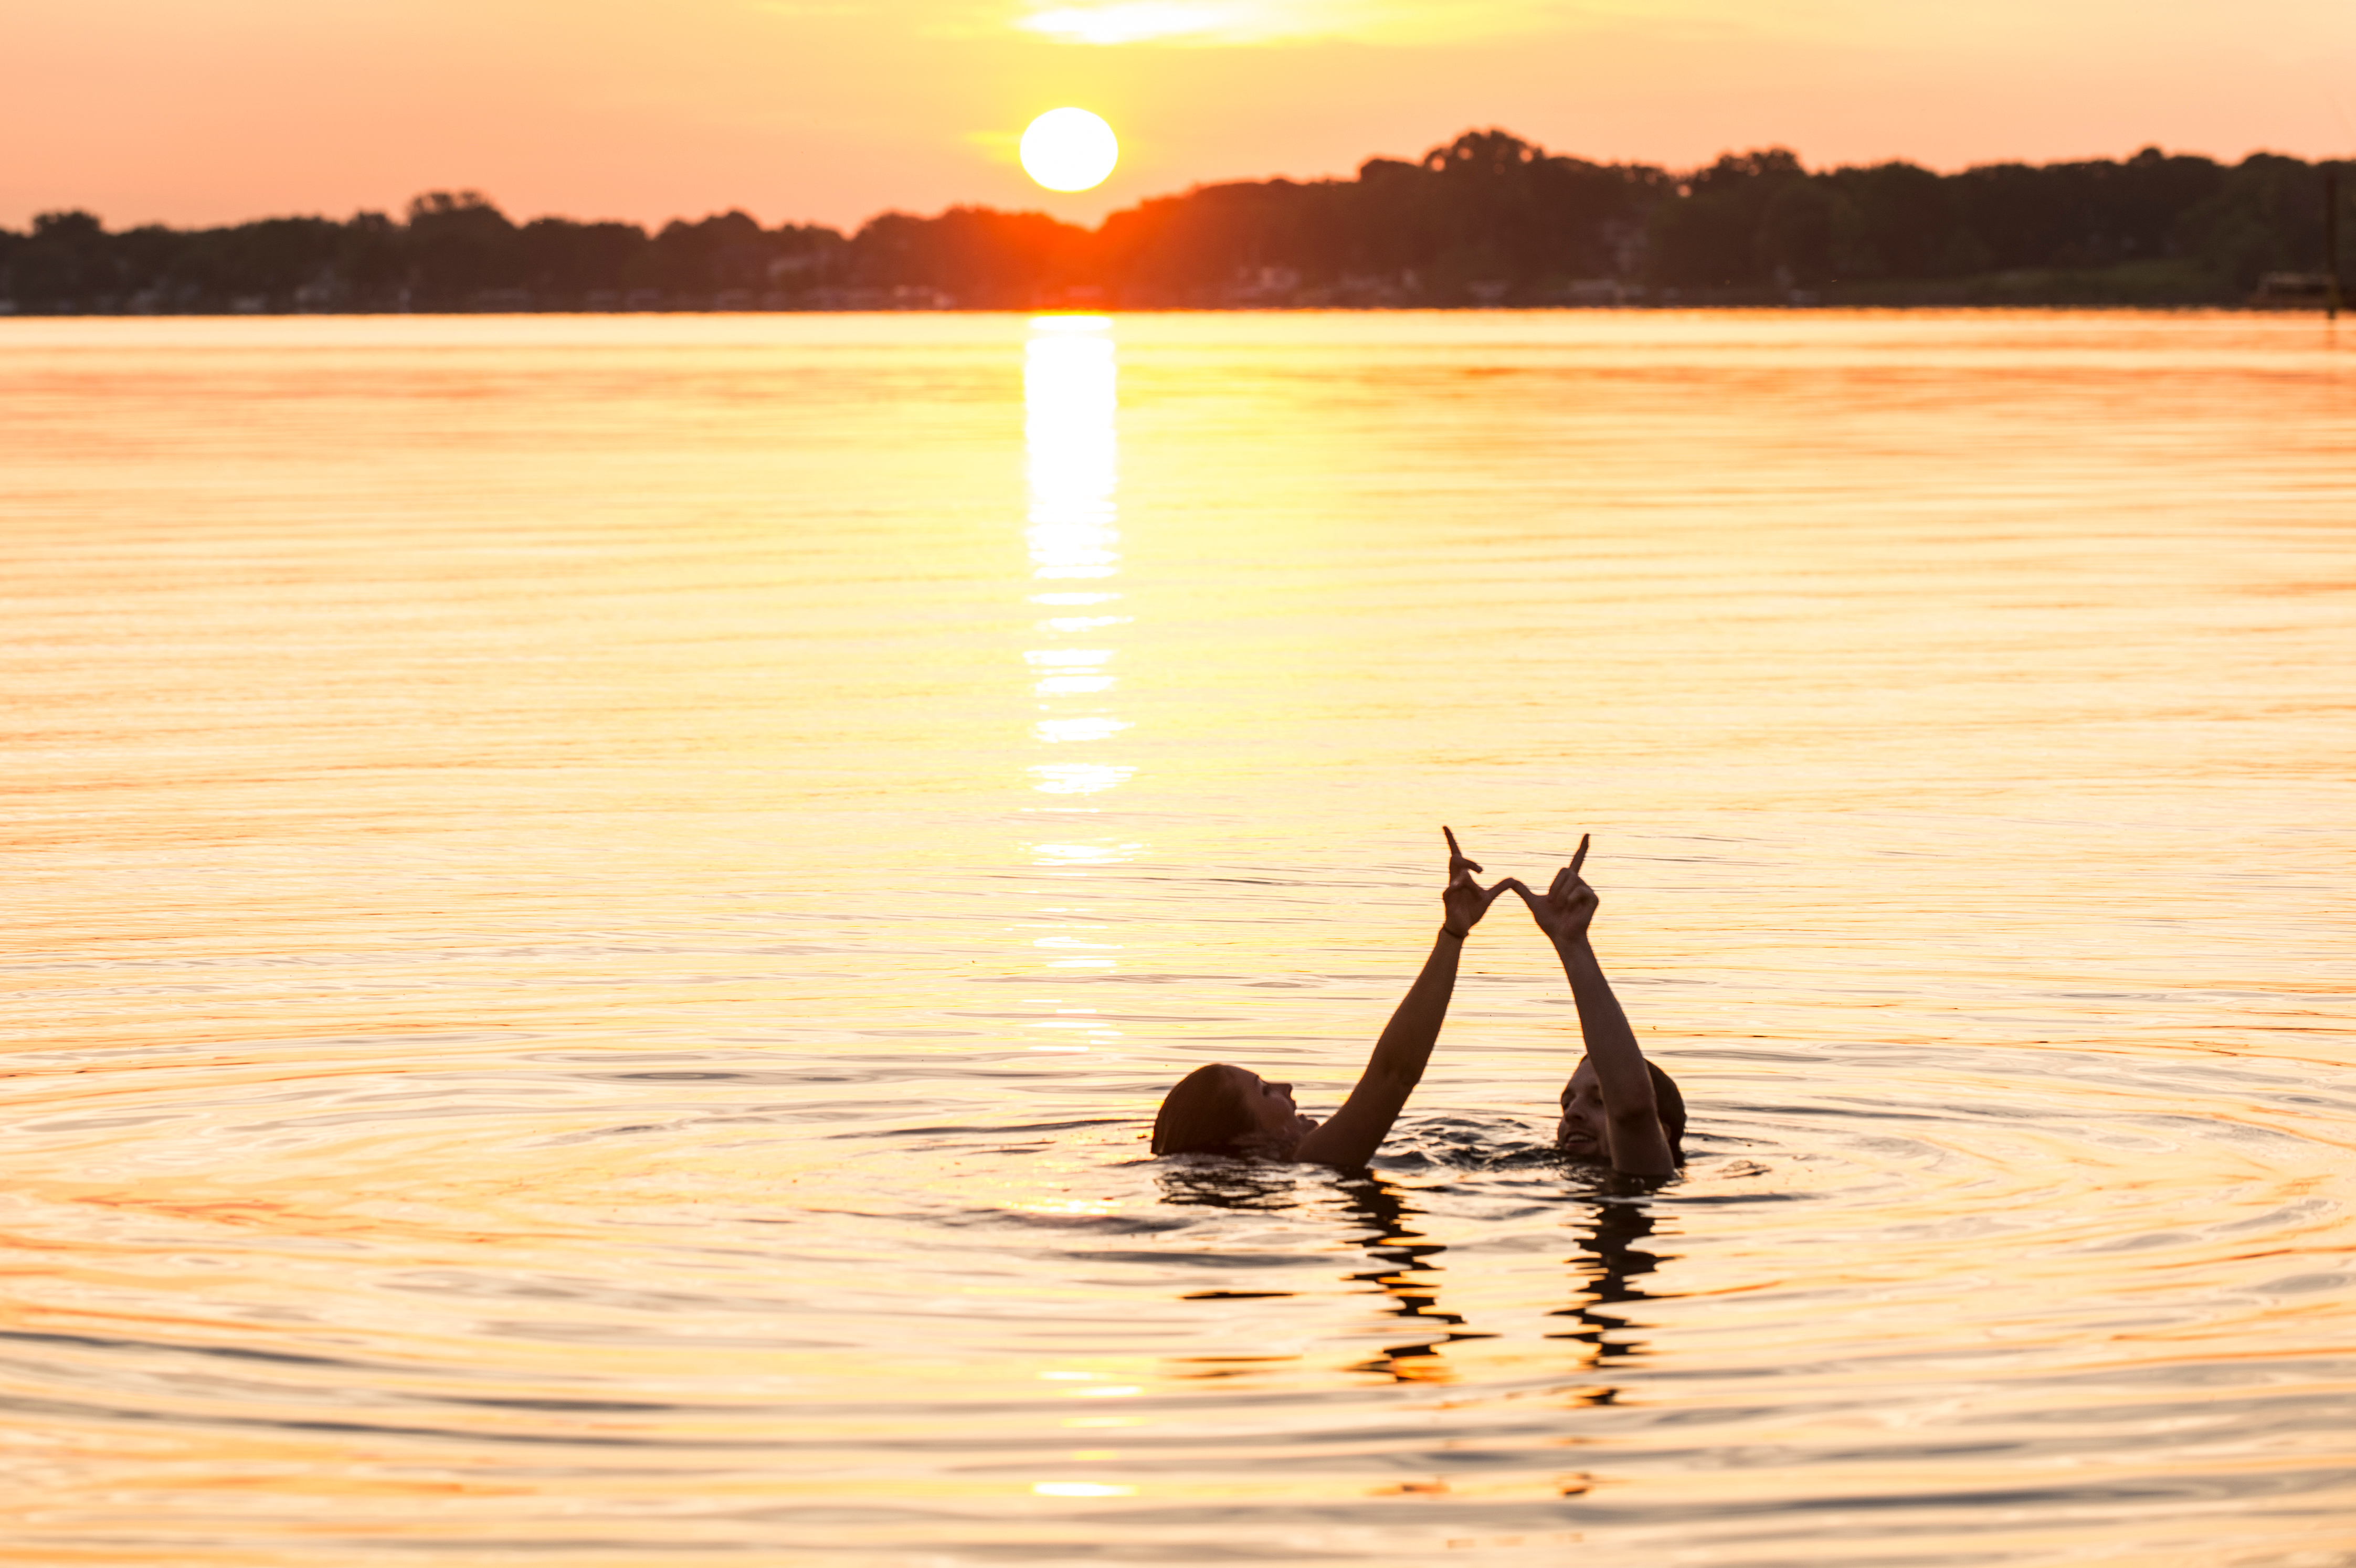 Having stayed up all night, undergraduates Loran Zweifelhofer and Willis Perley form a W hand sign as they greet the morning sunrise over Lake Mendota with a swim from the Goodspeed Family Pier near the Memorial Union Terrace at the University of Wisconsin-Madison on June 19, 2015. The two friends met during their freshman year and are now seniors. (Photo by Jeff Miller/UW-Madison)